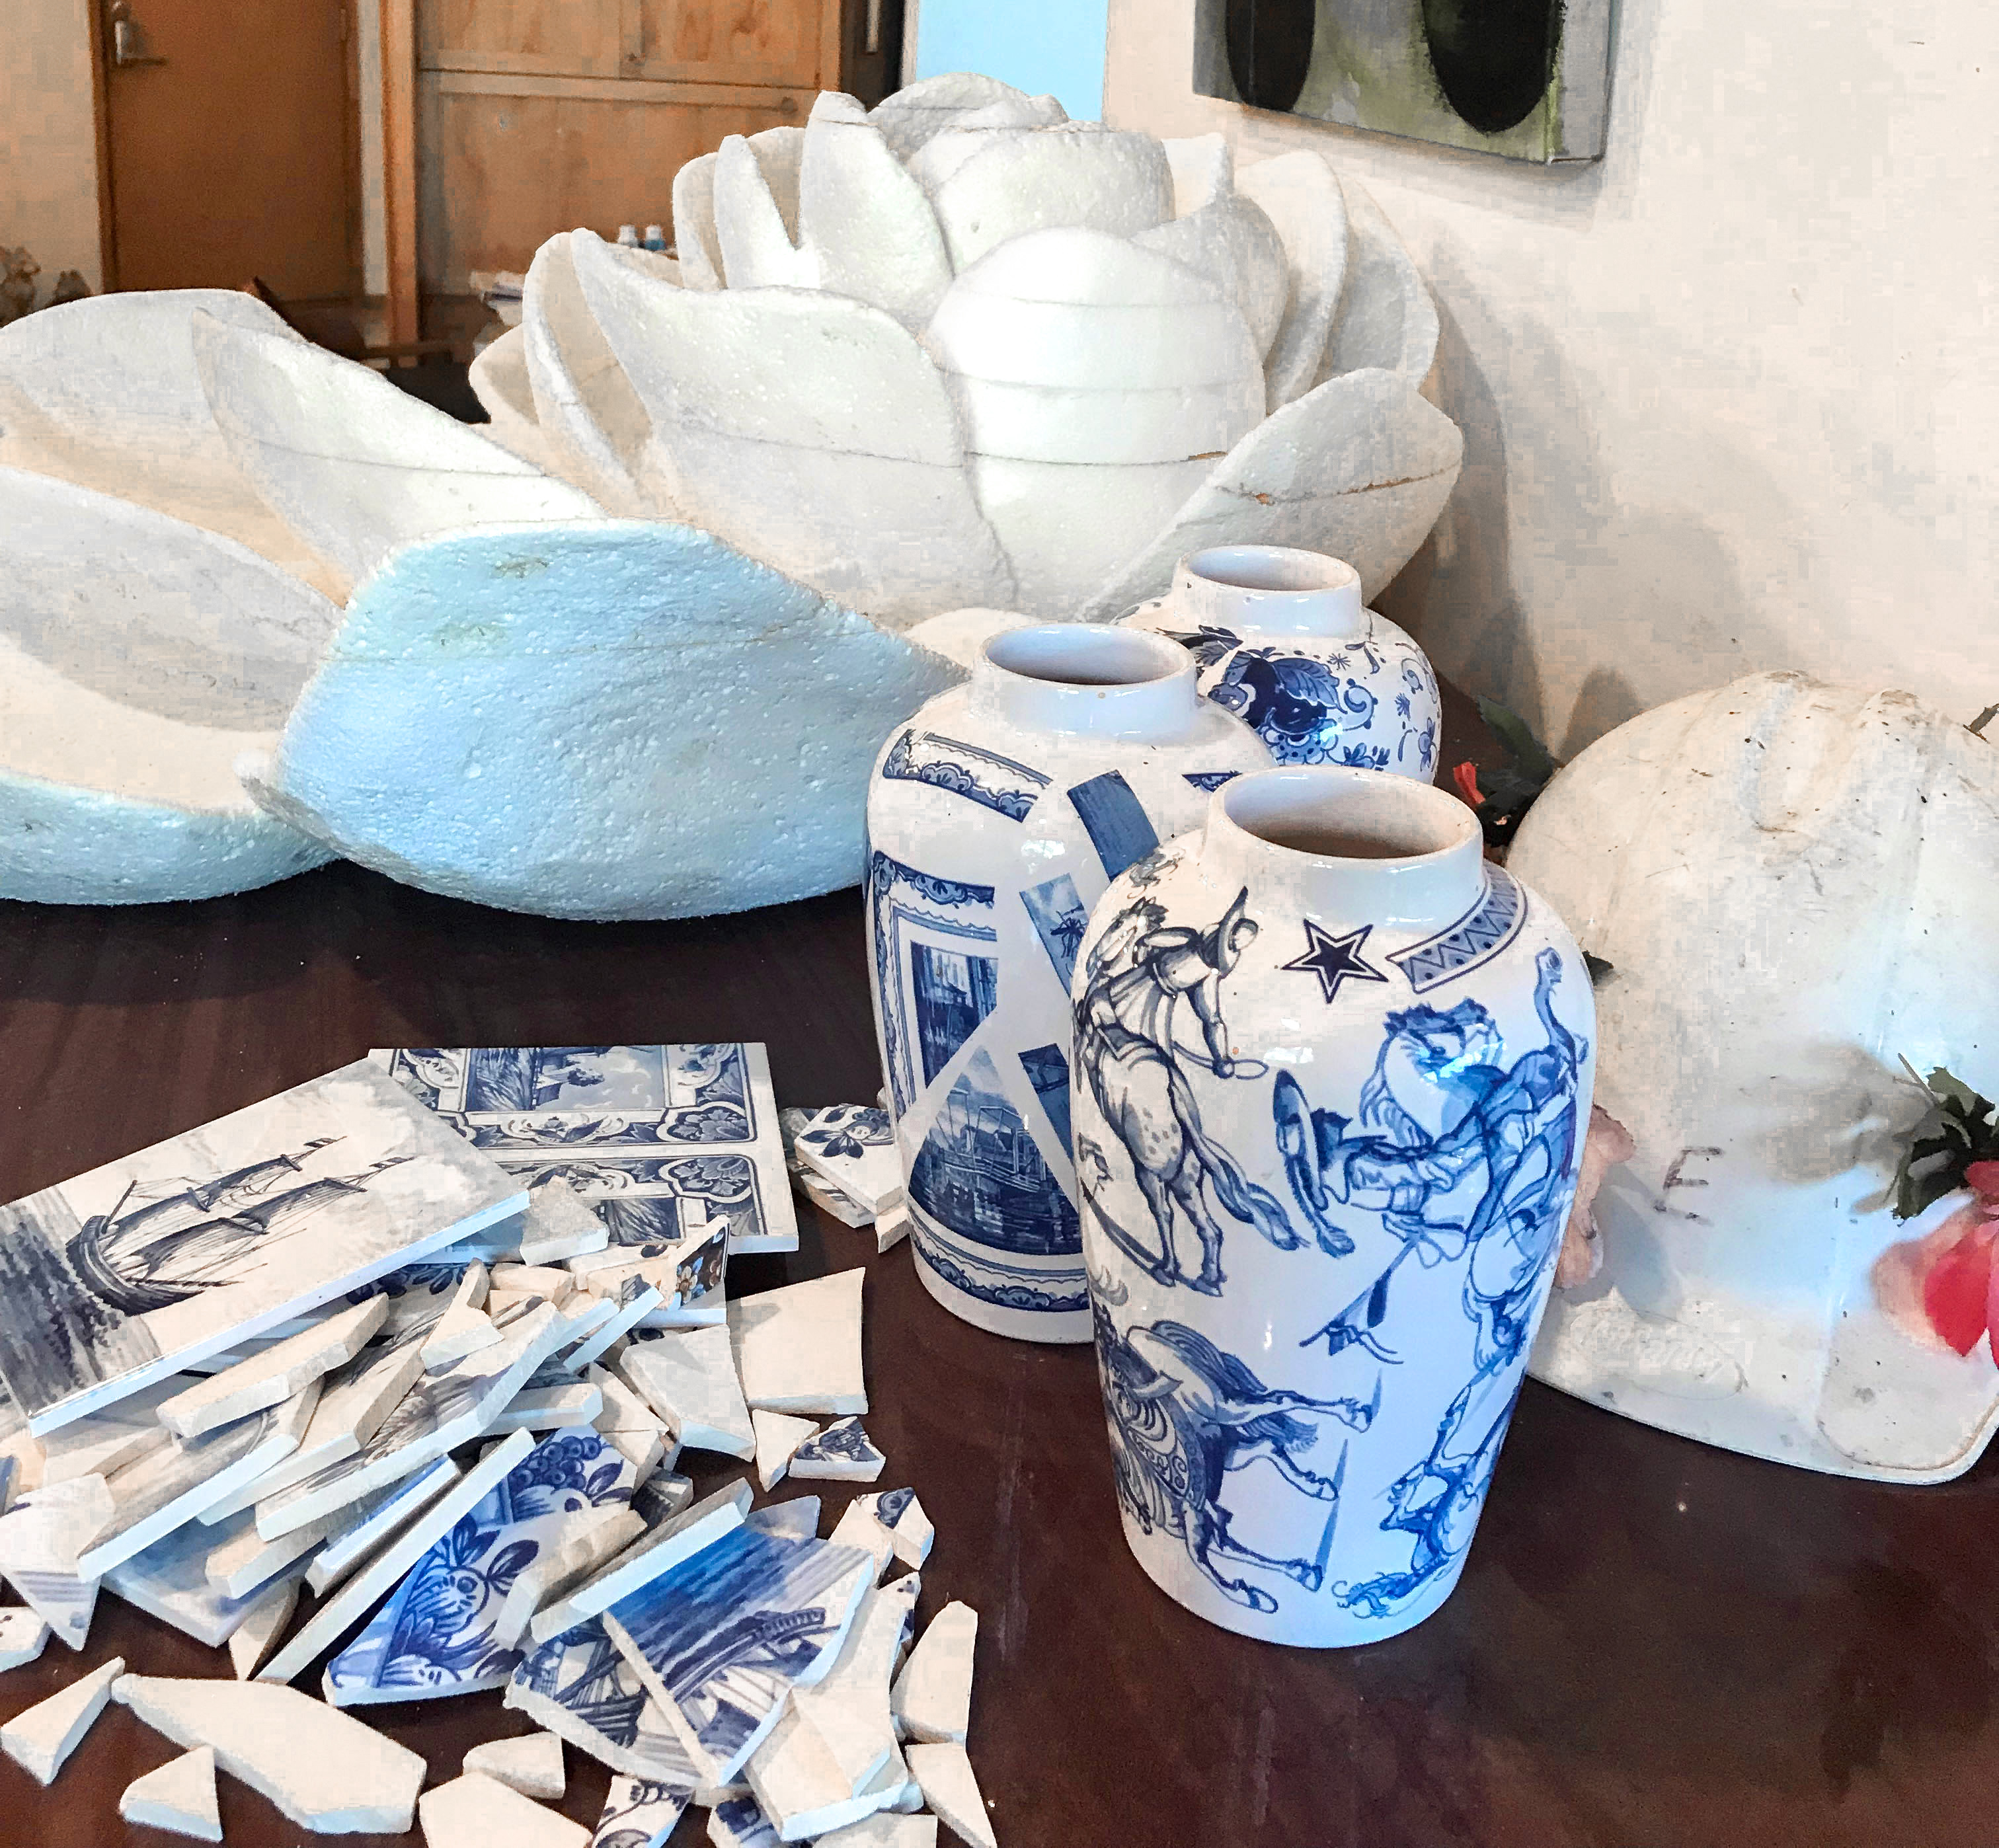 Osinski and his team collectively broke 200 Delft porcelain vases and more than 10,000 tiles to create a quarter-of-a-million mosaic fragments.